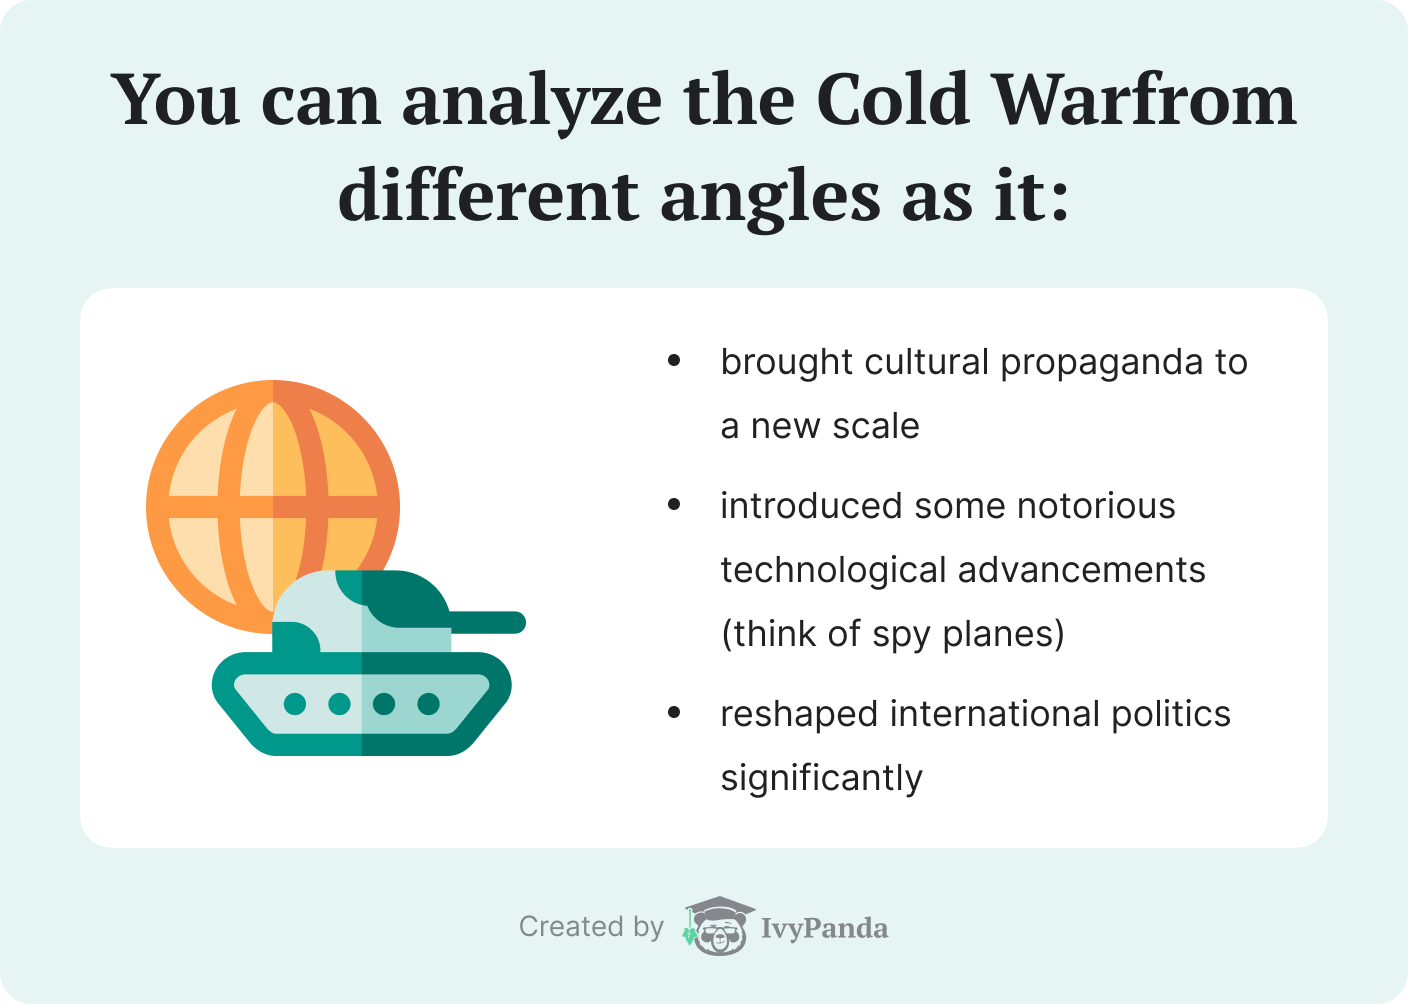 For your history dissertation, analyze the Cold War from different angles.